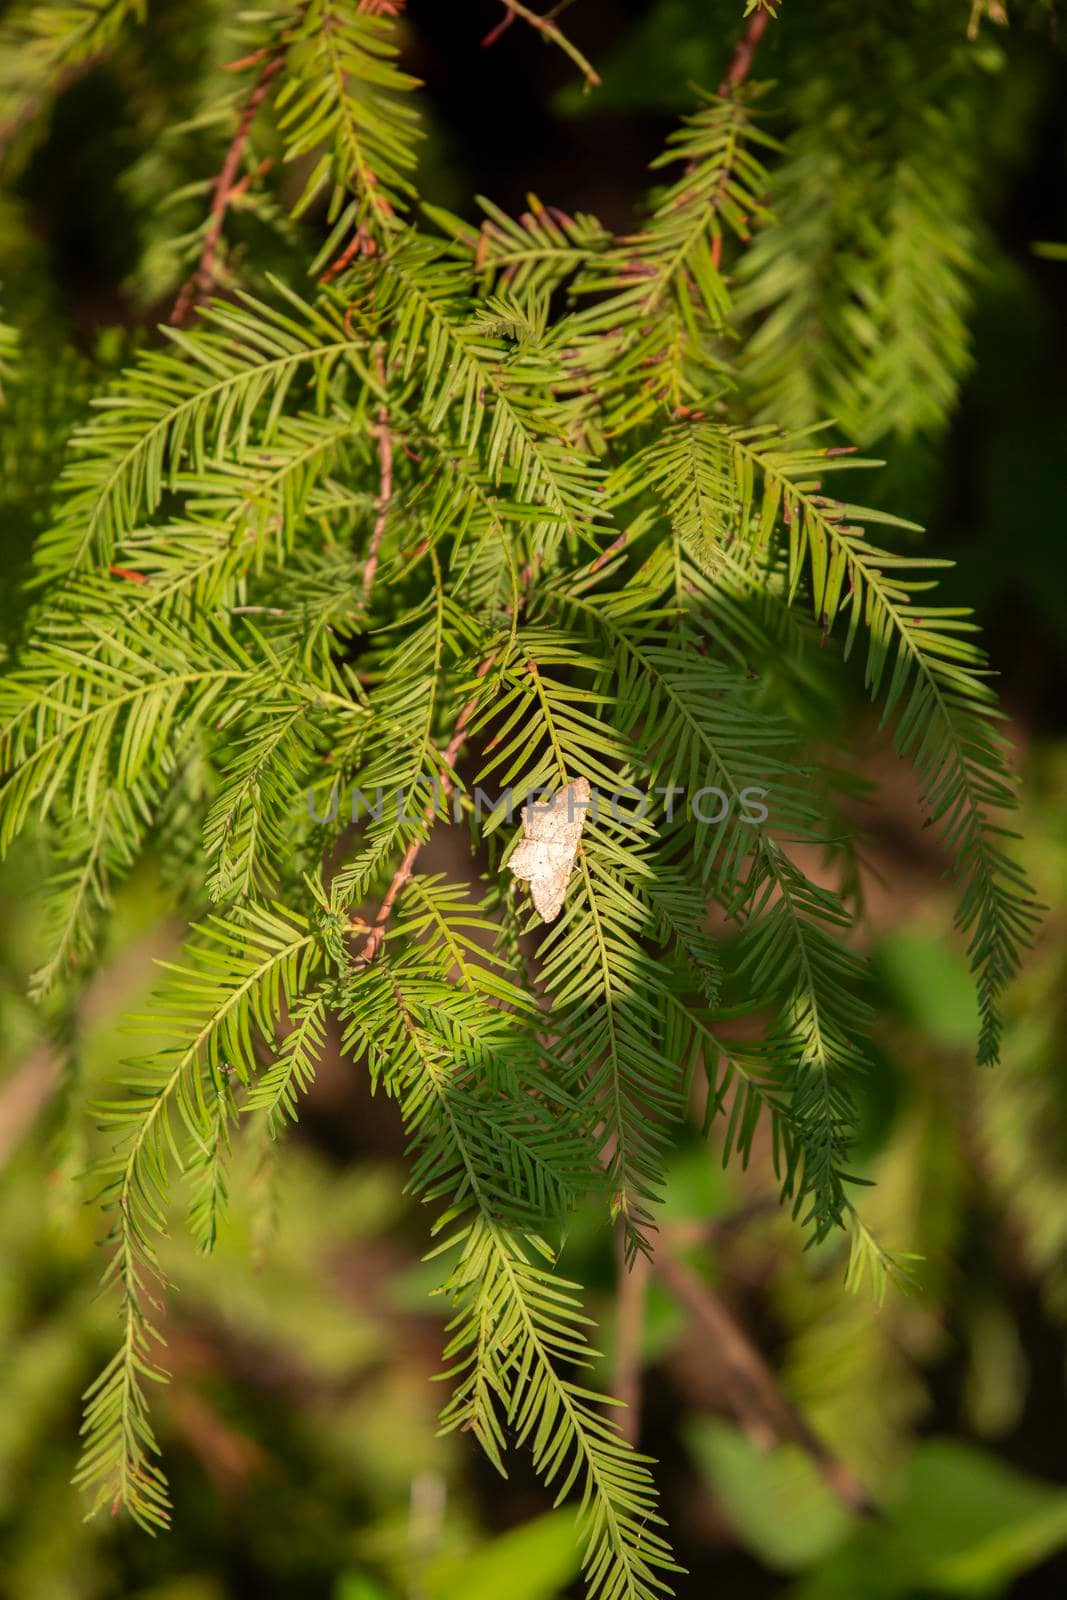 Northern white skipper (Heliopetes ericetorum) latched onto the bright green needles of a cypress tree